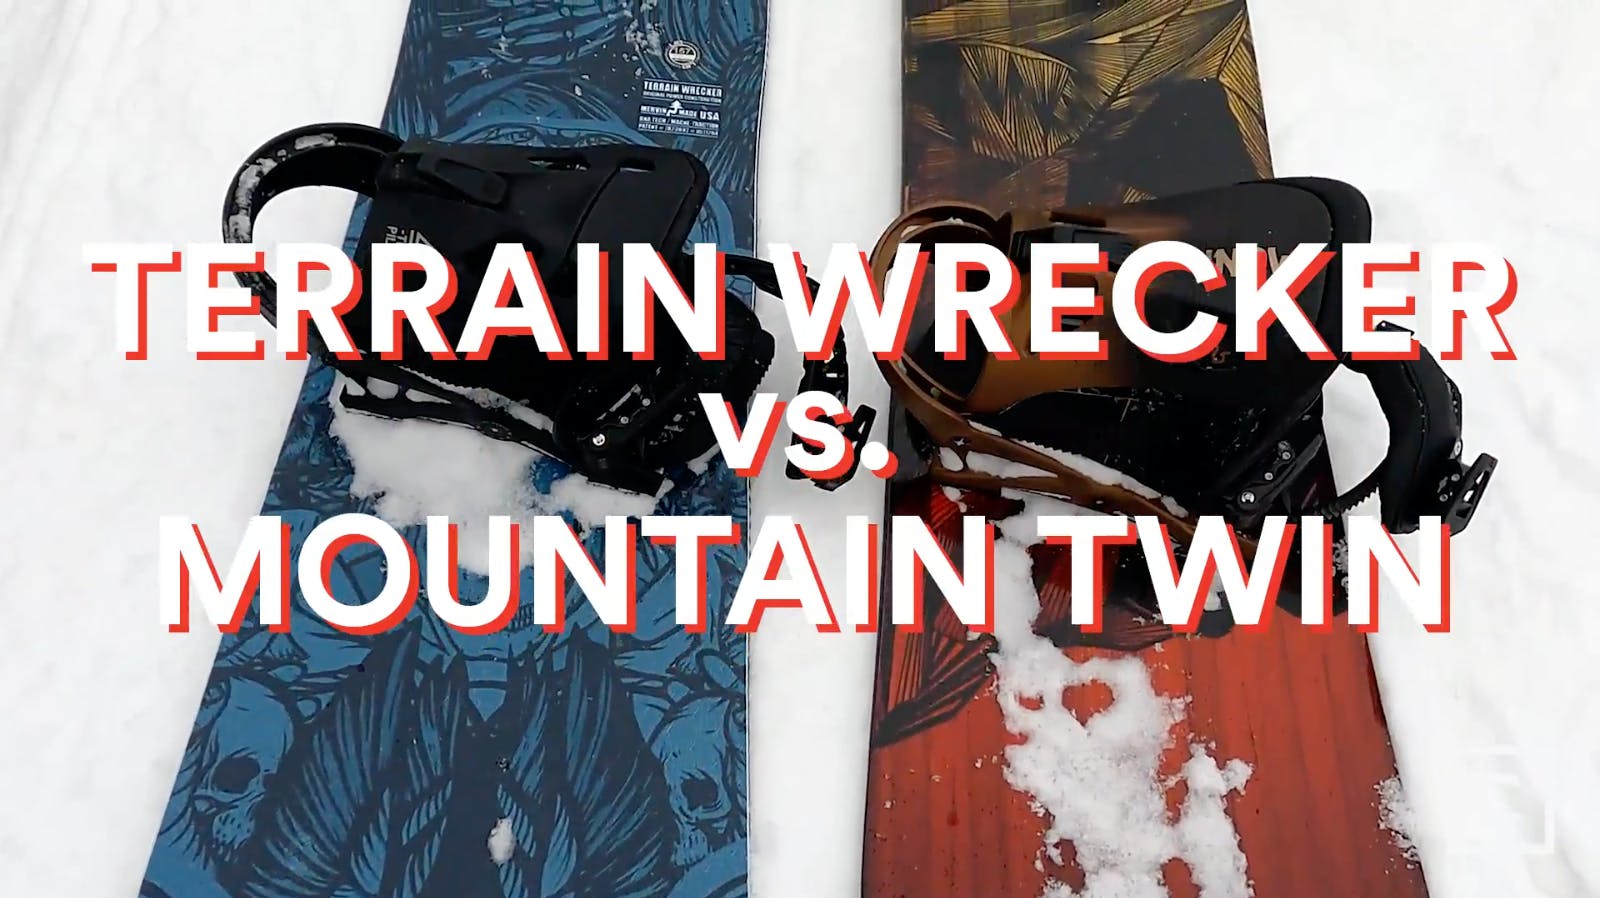 The Lib Tech Terrain Wrecker and Jones Mountain Twin side by side in the snow with a "Terrain Wrecker vs. Mountain Twin" graphic over them